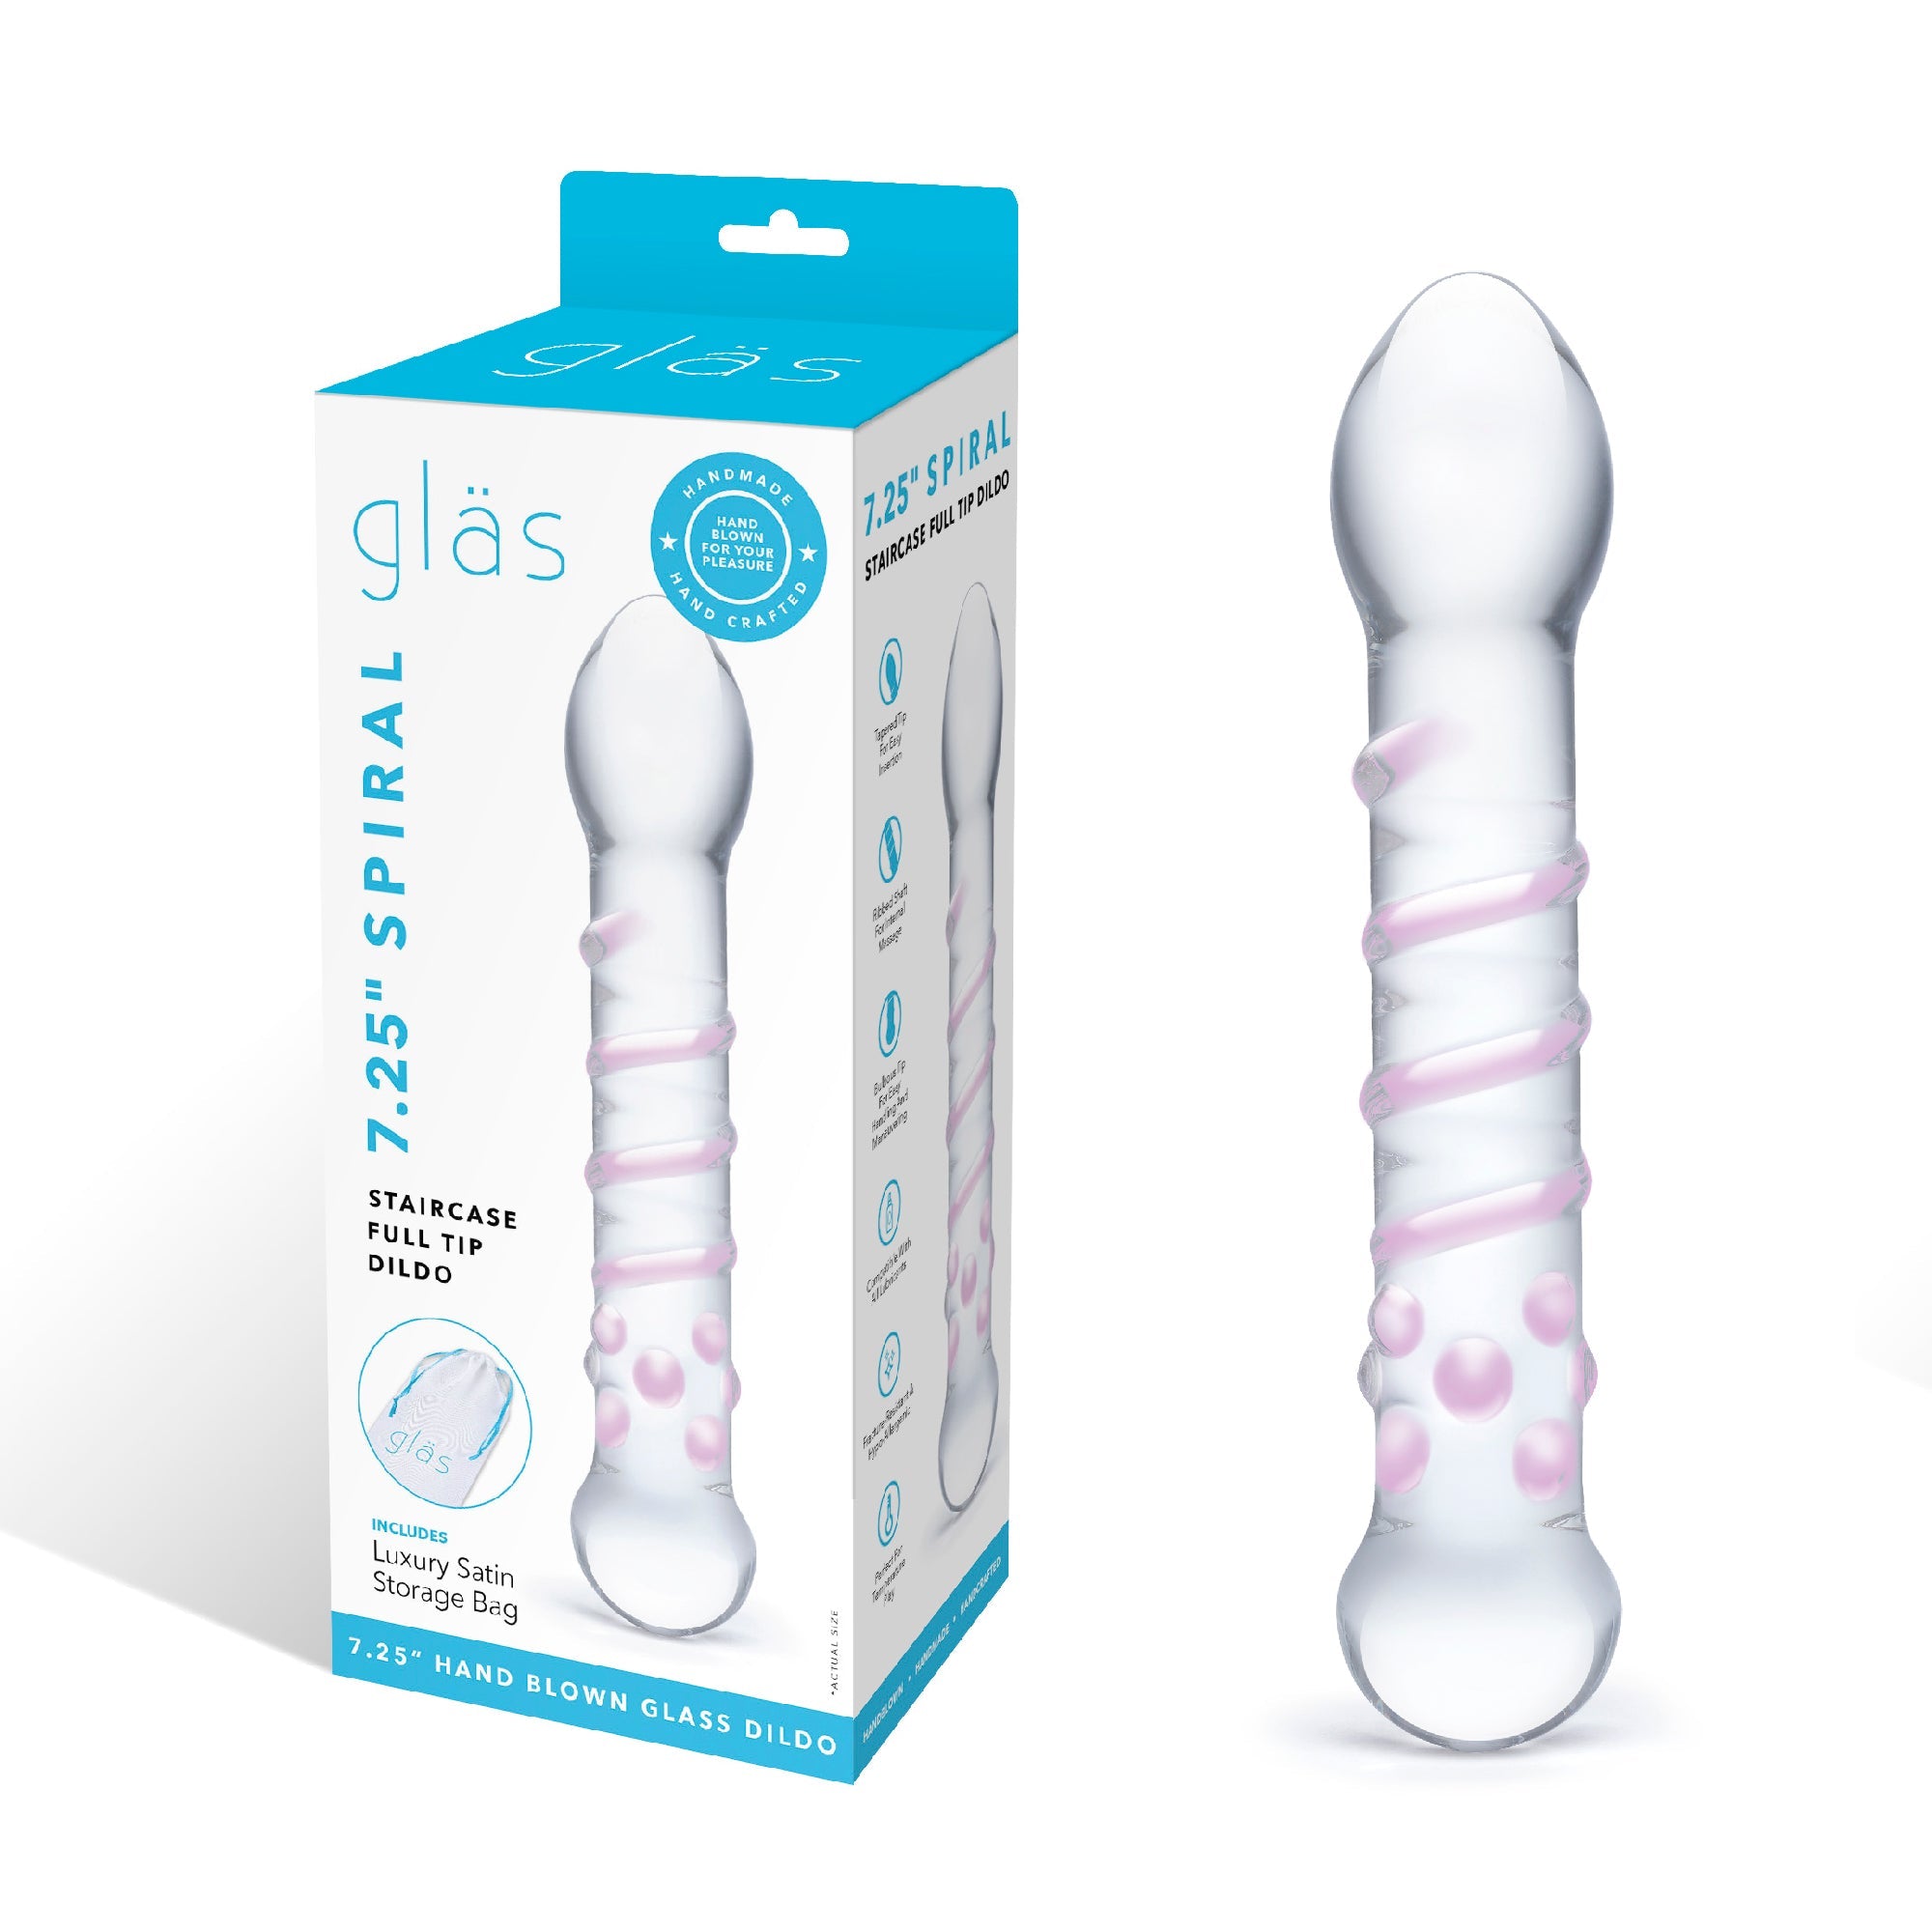 Glas - Spiral Staircase Full Tip Glass Dildo 7.25" (Clear)